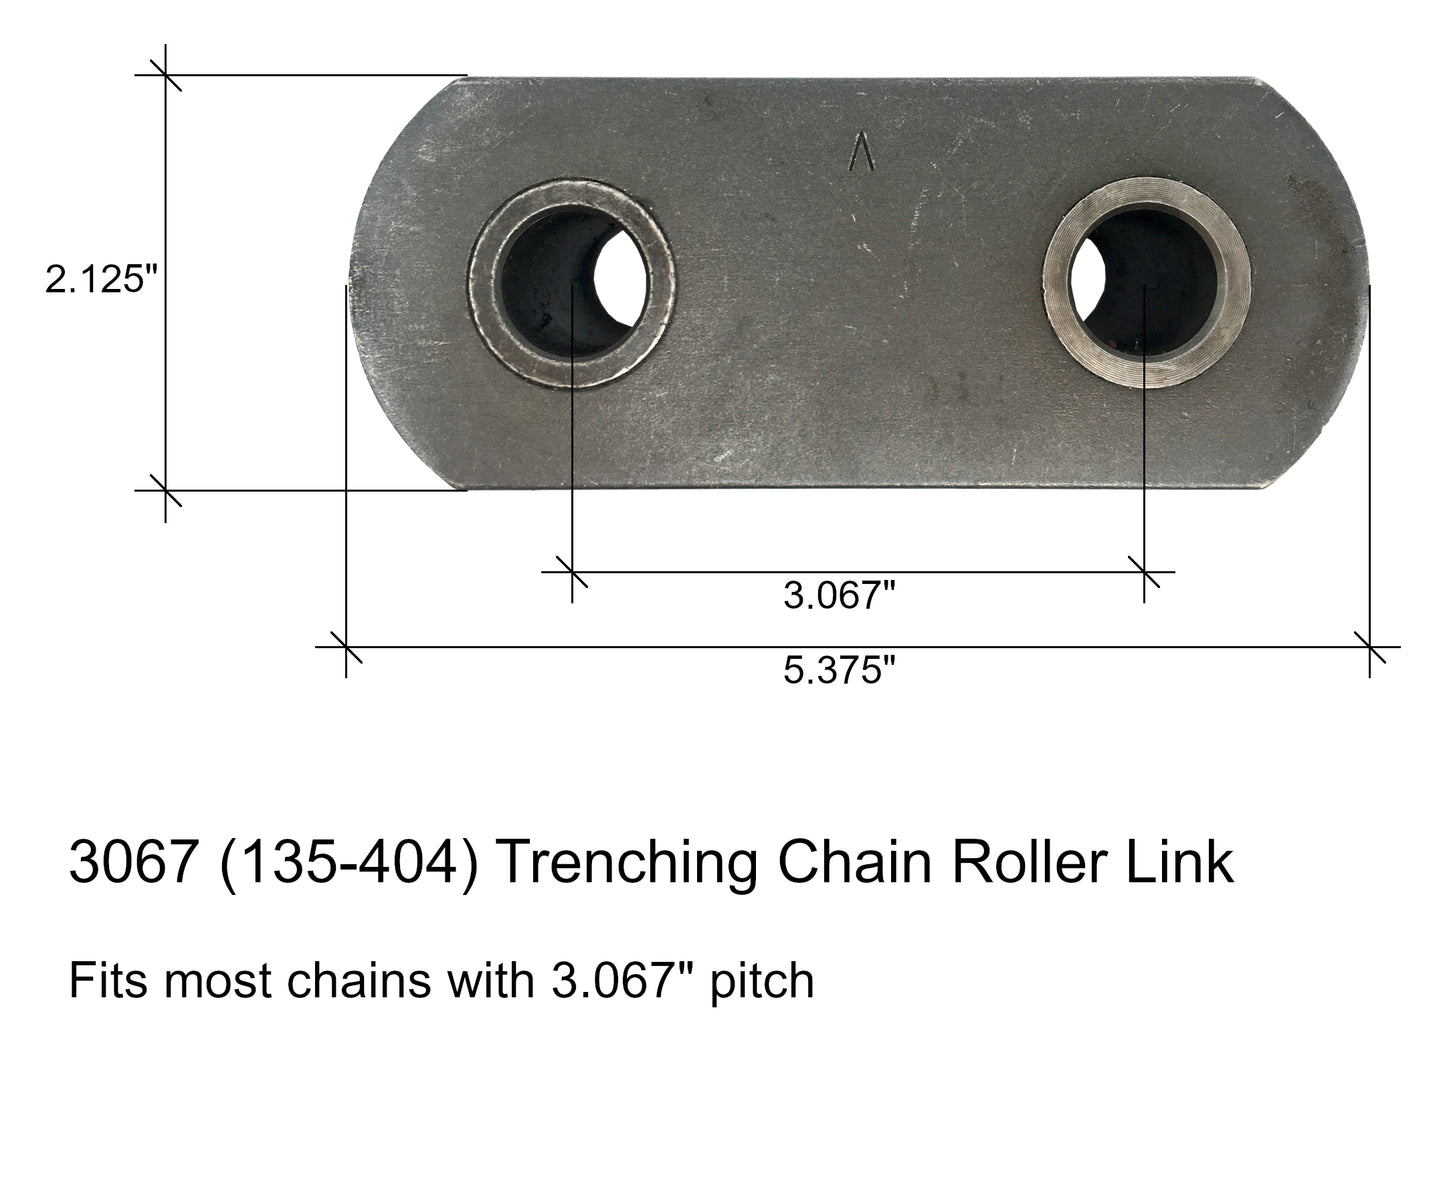 Trenching Chain Roller Link, Fits Chains w/ 3.067" Pitch - 135-404, 3067RL